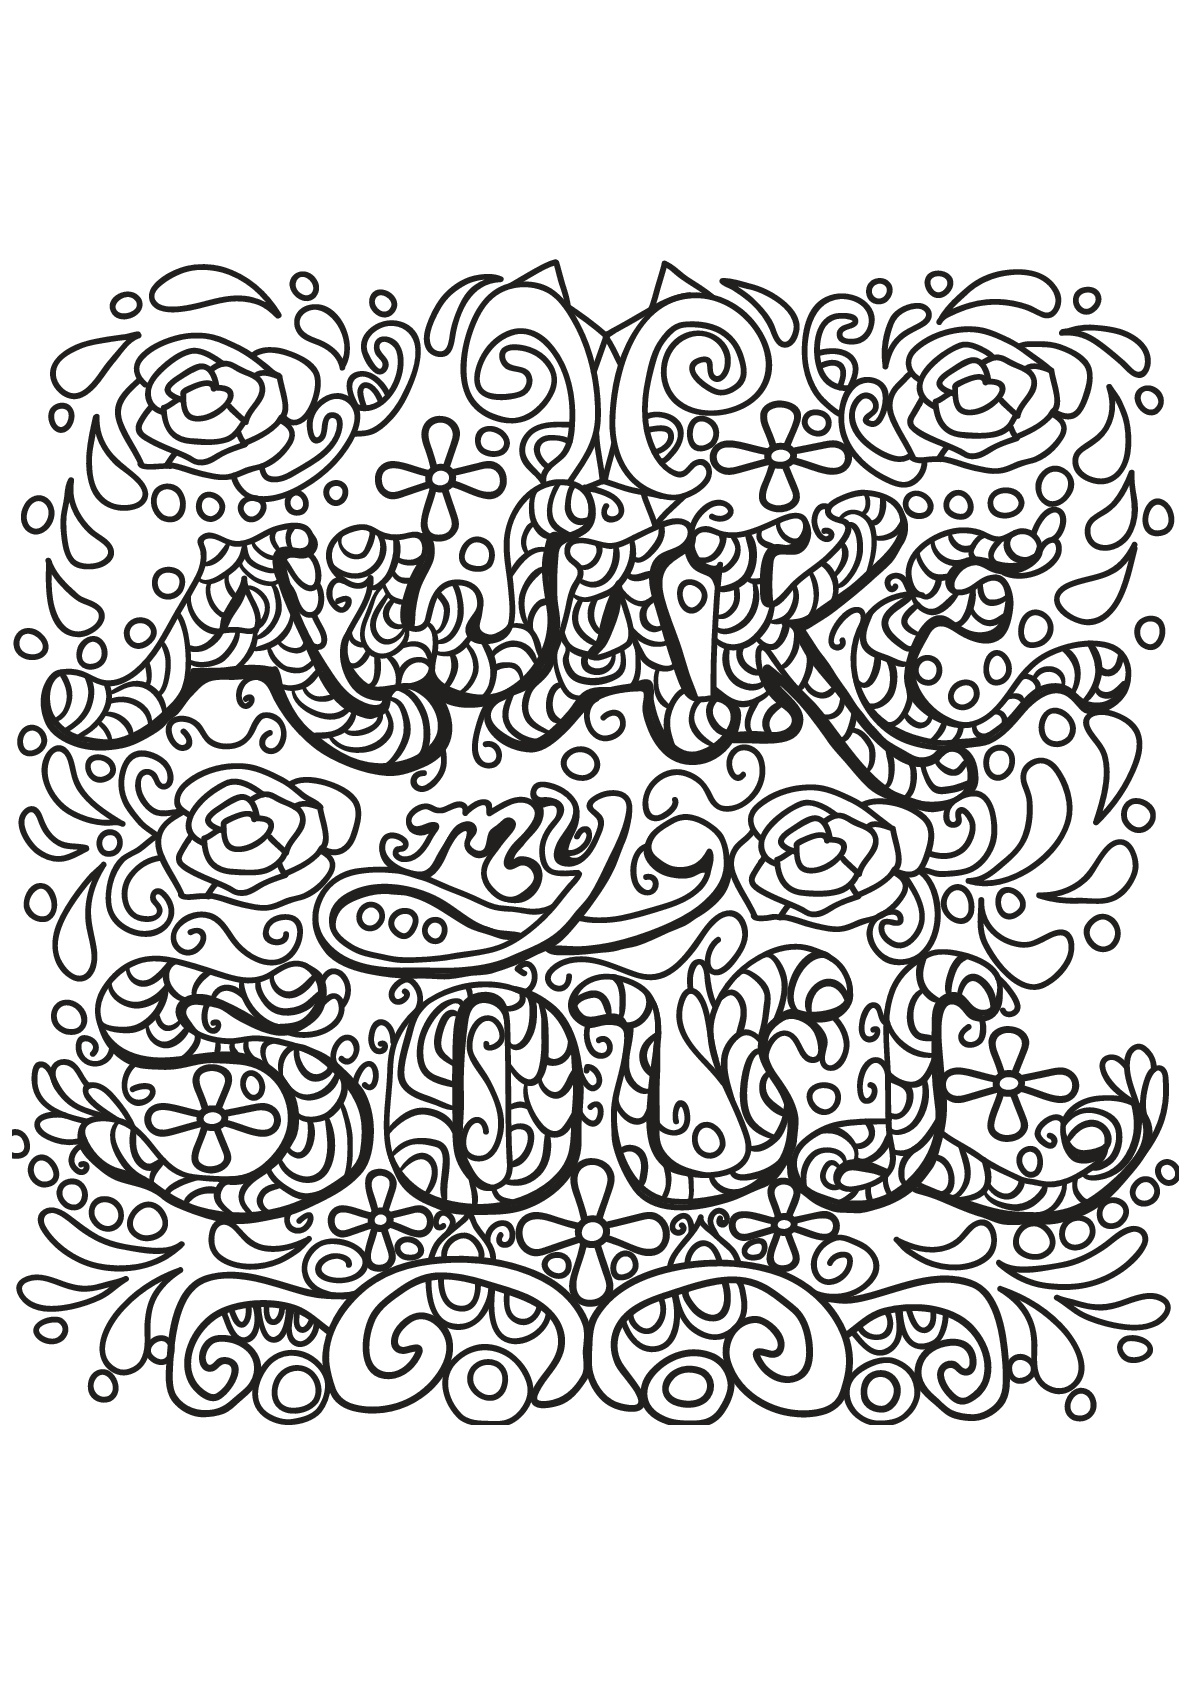 Download Free book quote 9 - Quotes Adult Coloring Pages